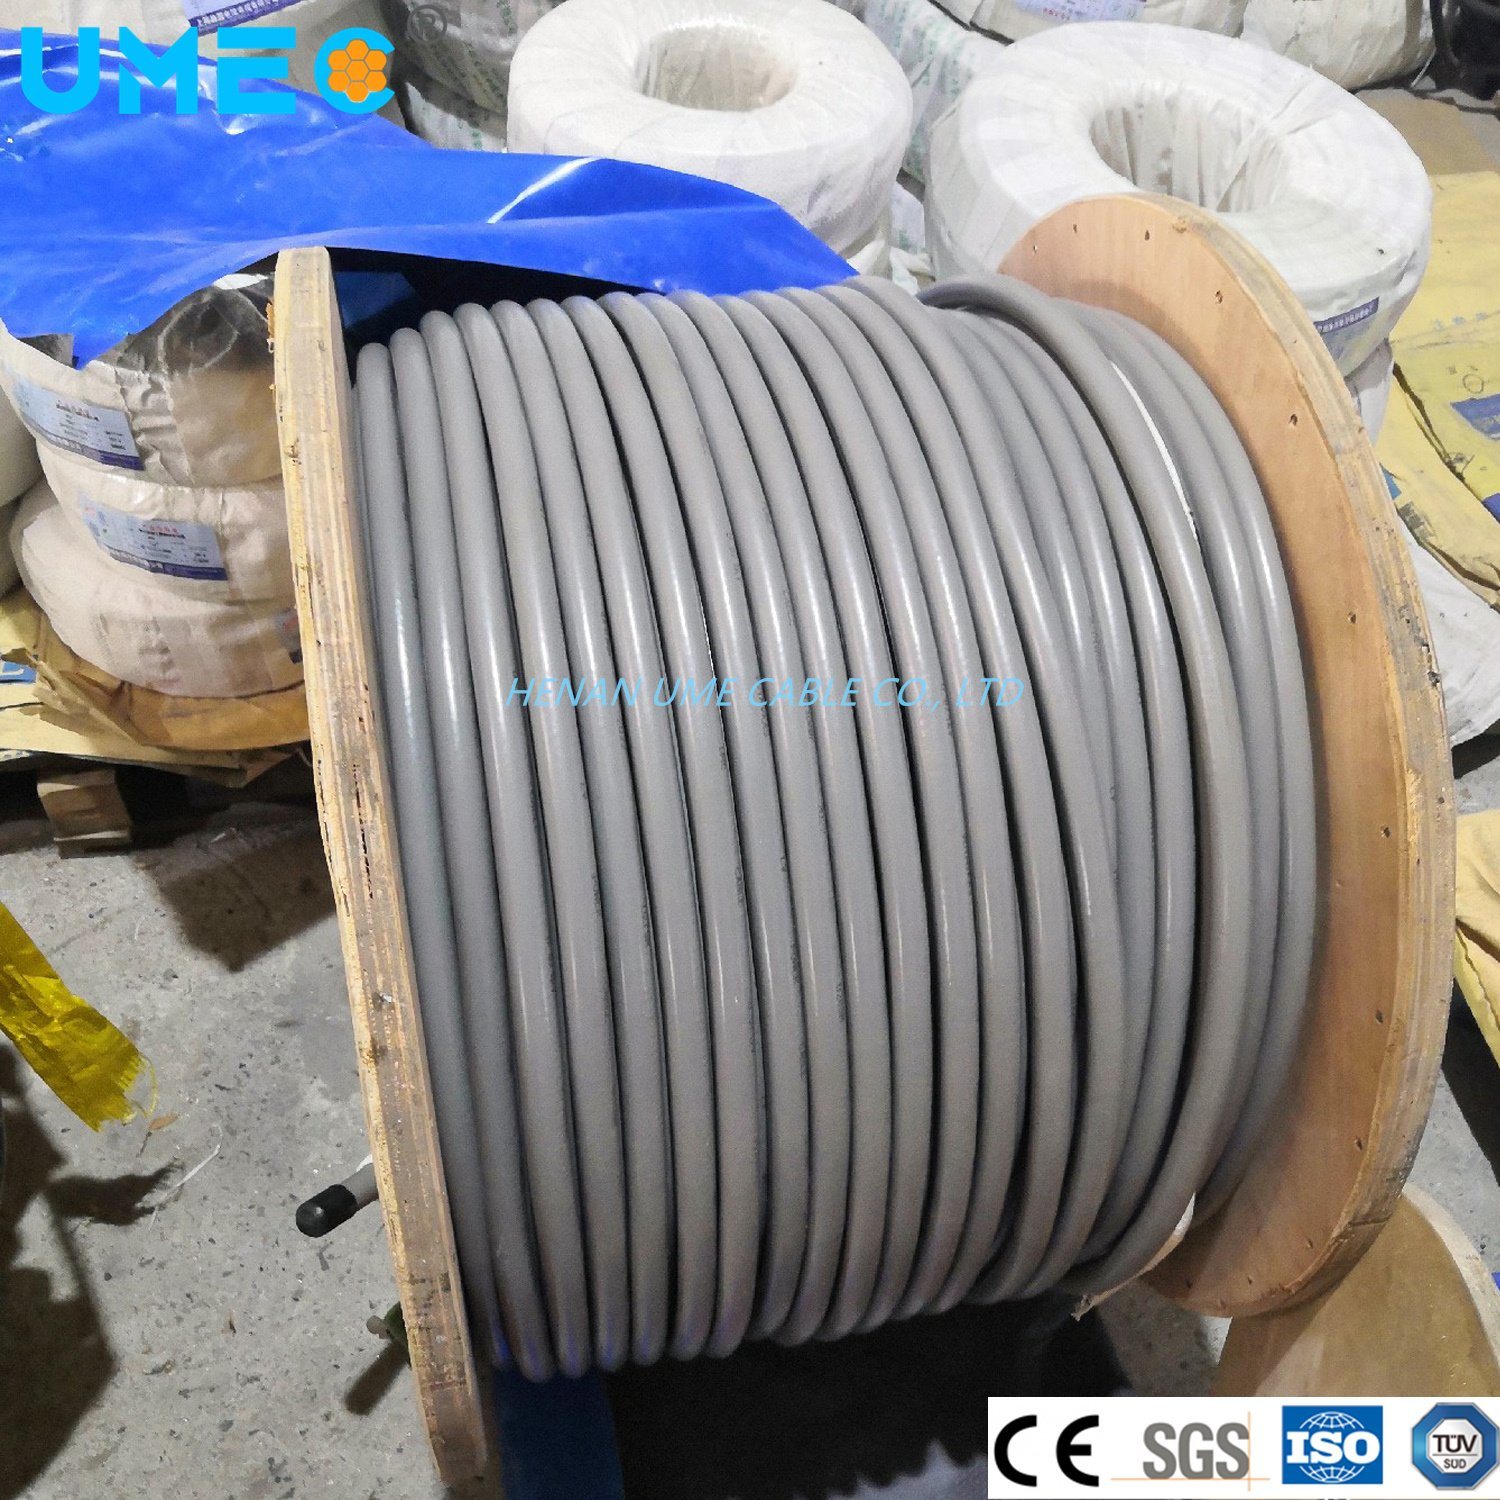 CE Power Cable Ymvkas MB& Vo-Ymvkas MB Cables 2X10 4X10 2X16 4X16mm2 Underground Electric Cable Wire